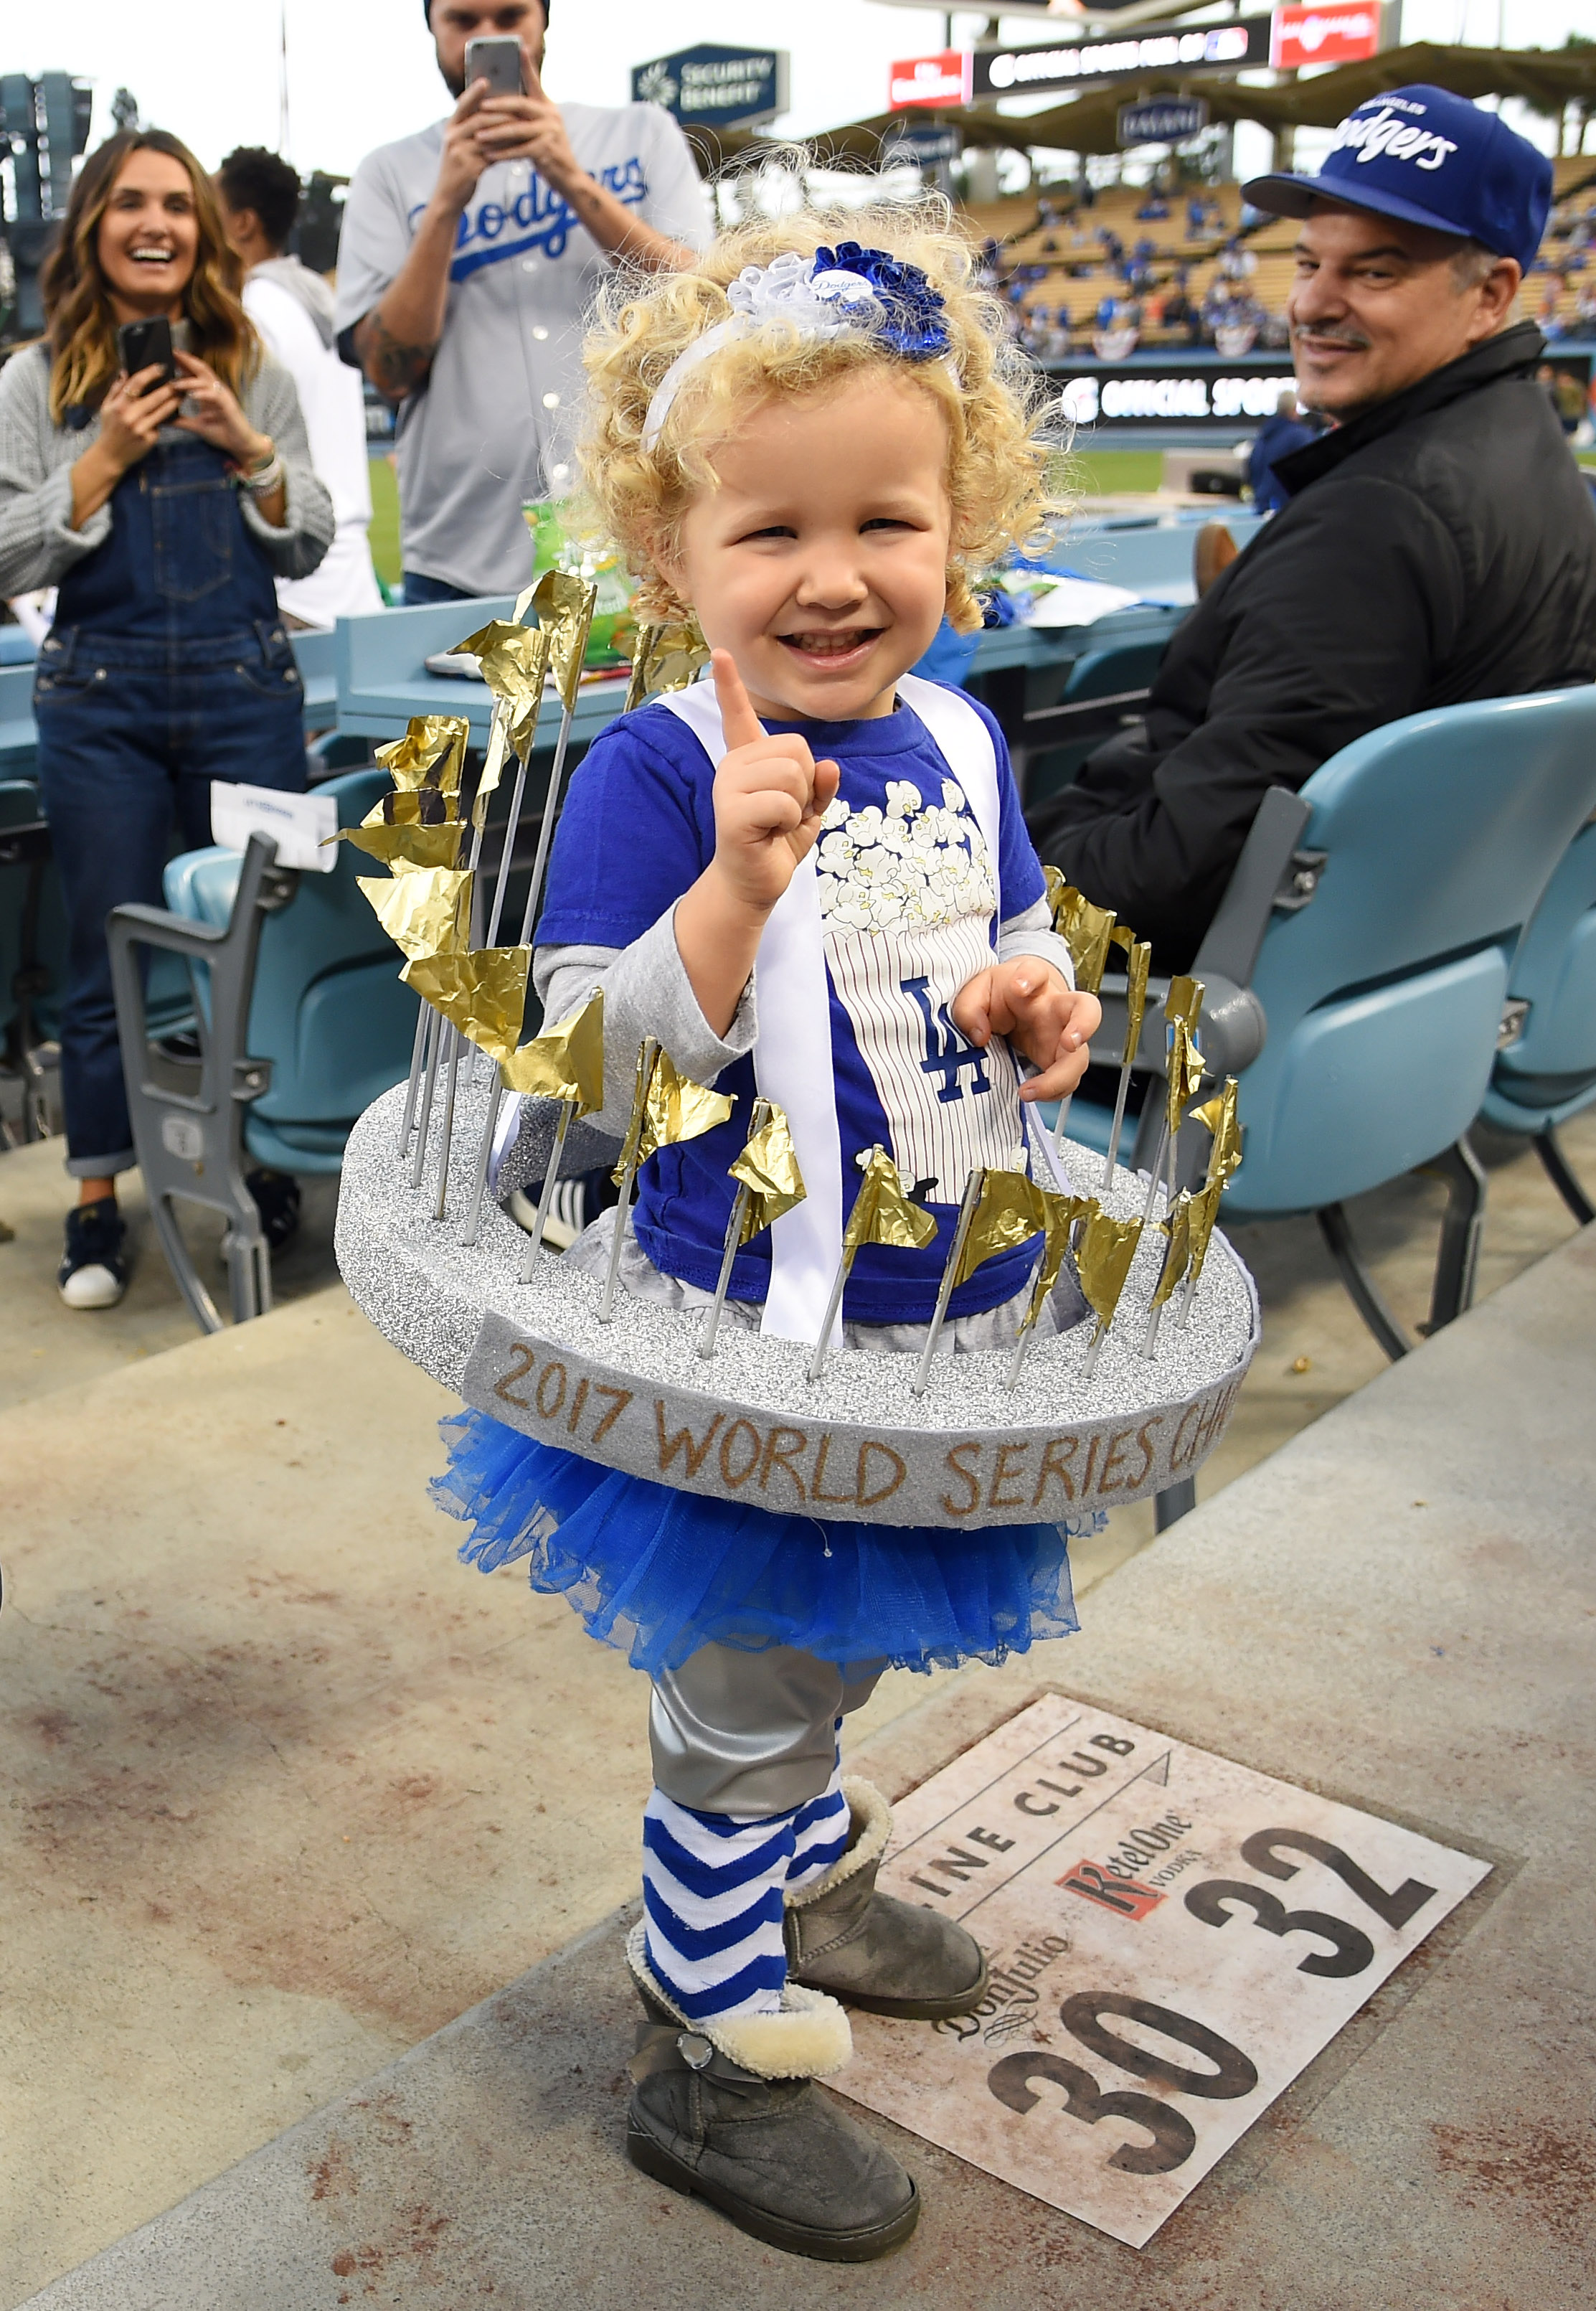 Dodgers fans are seen dressed up in costumes for halloween prior